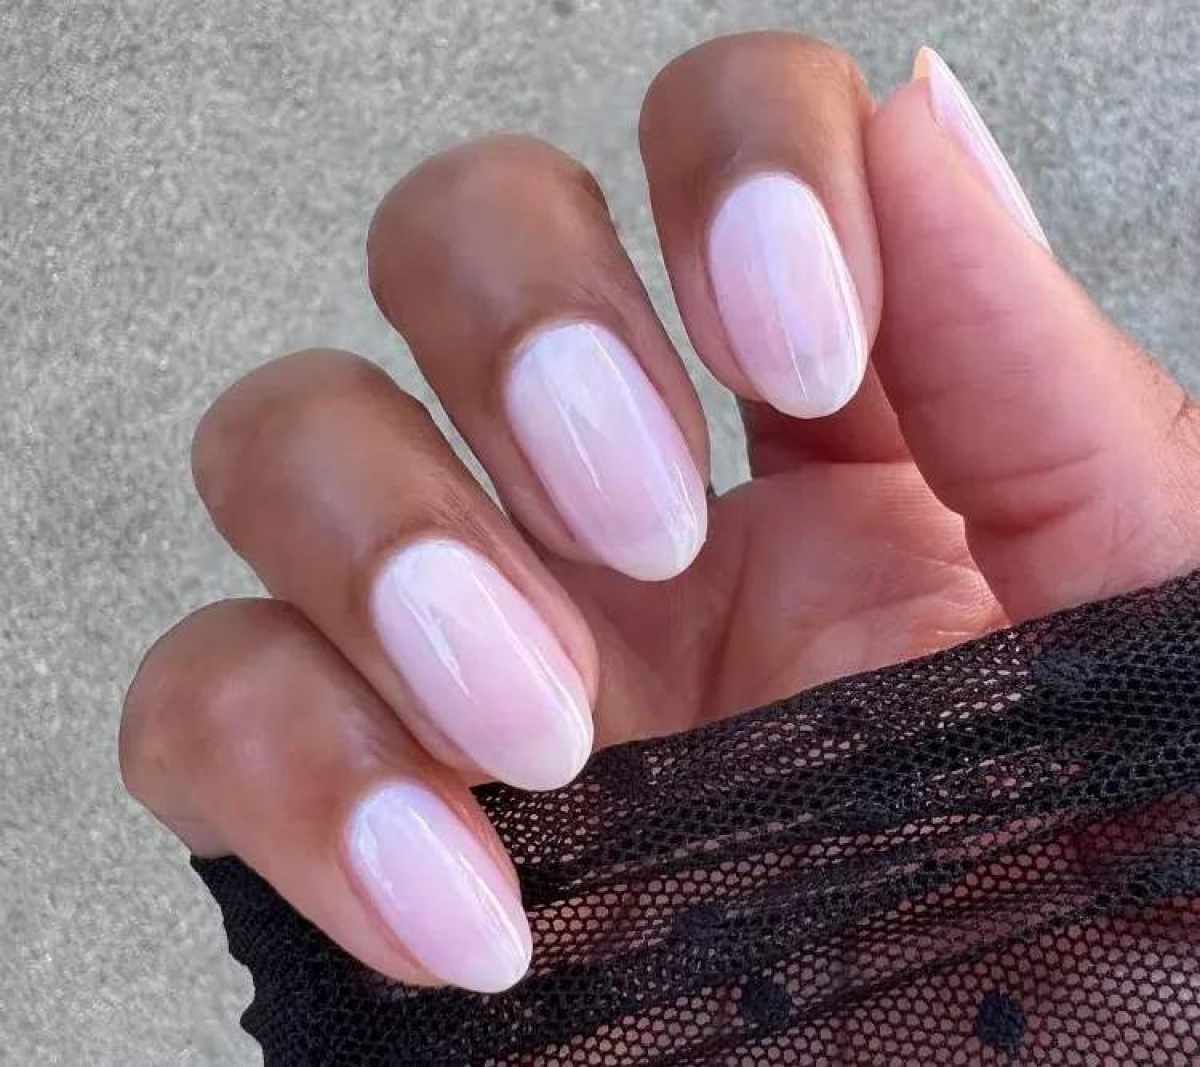 Lip gloss nails are the minimalist nail trend for 2023, which we will soon  see everywhere